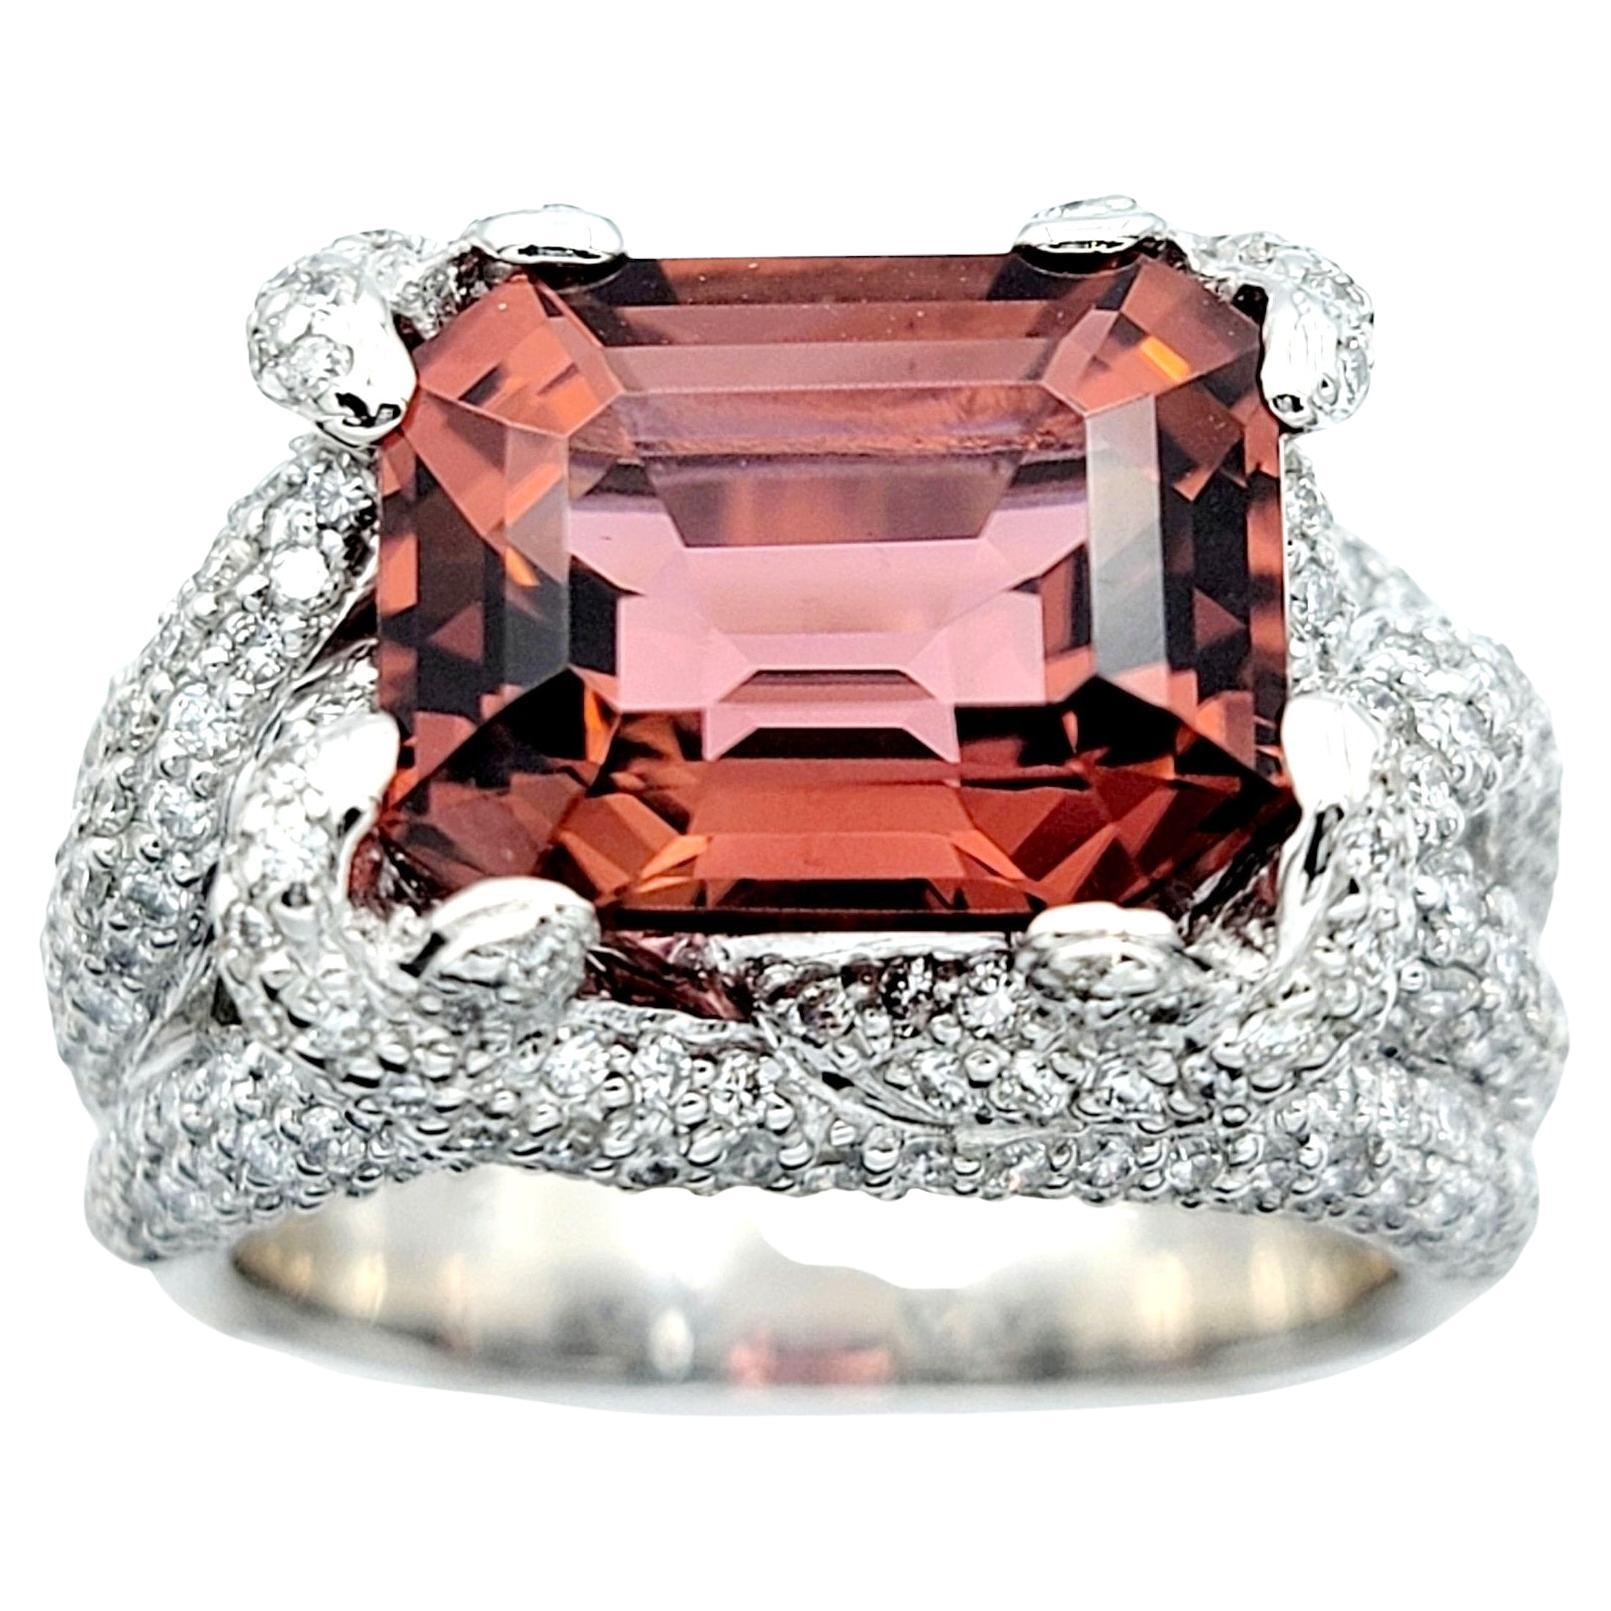 Emerald Cut Pink Tourmaline and Multi Row Diamond Cocktail Ring 18K White Gold 